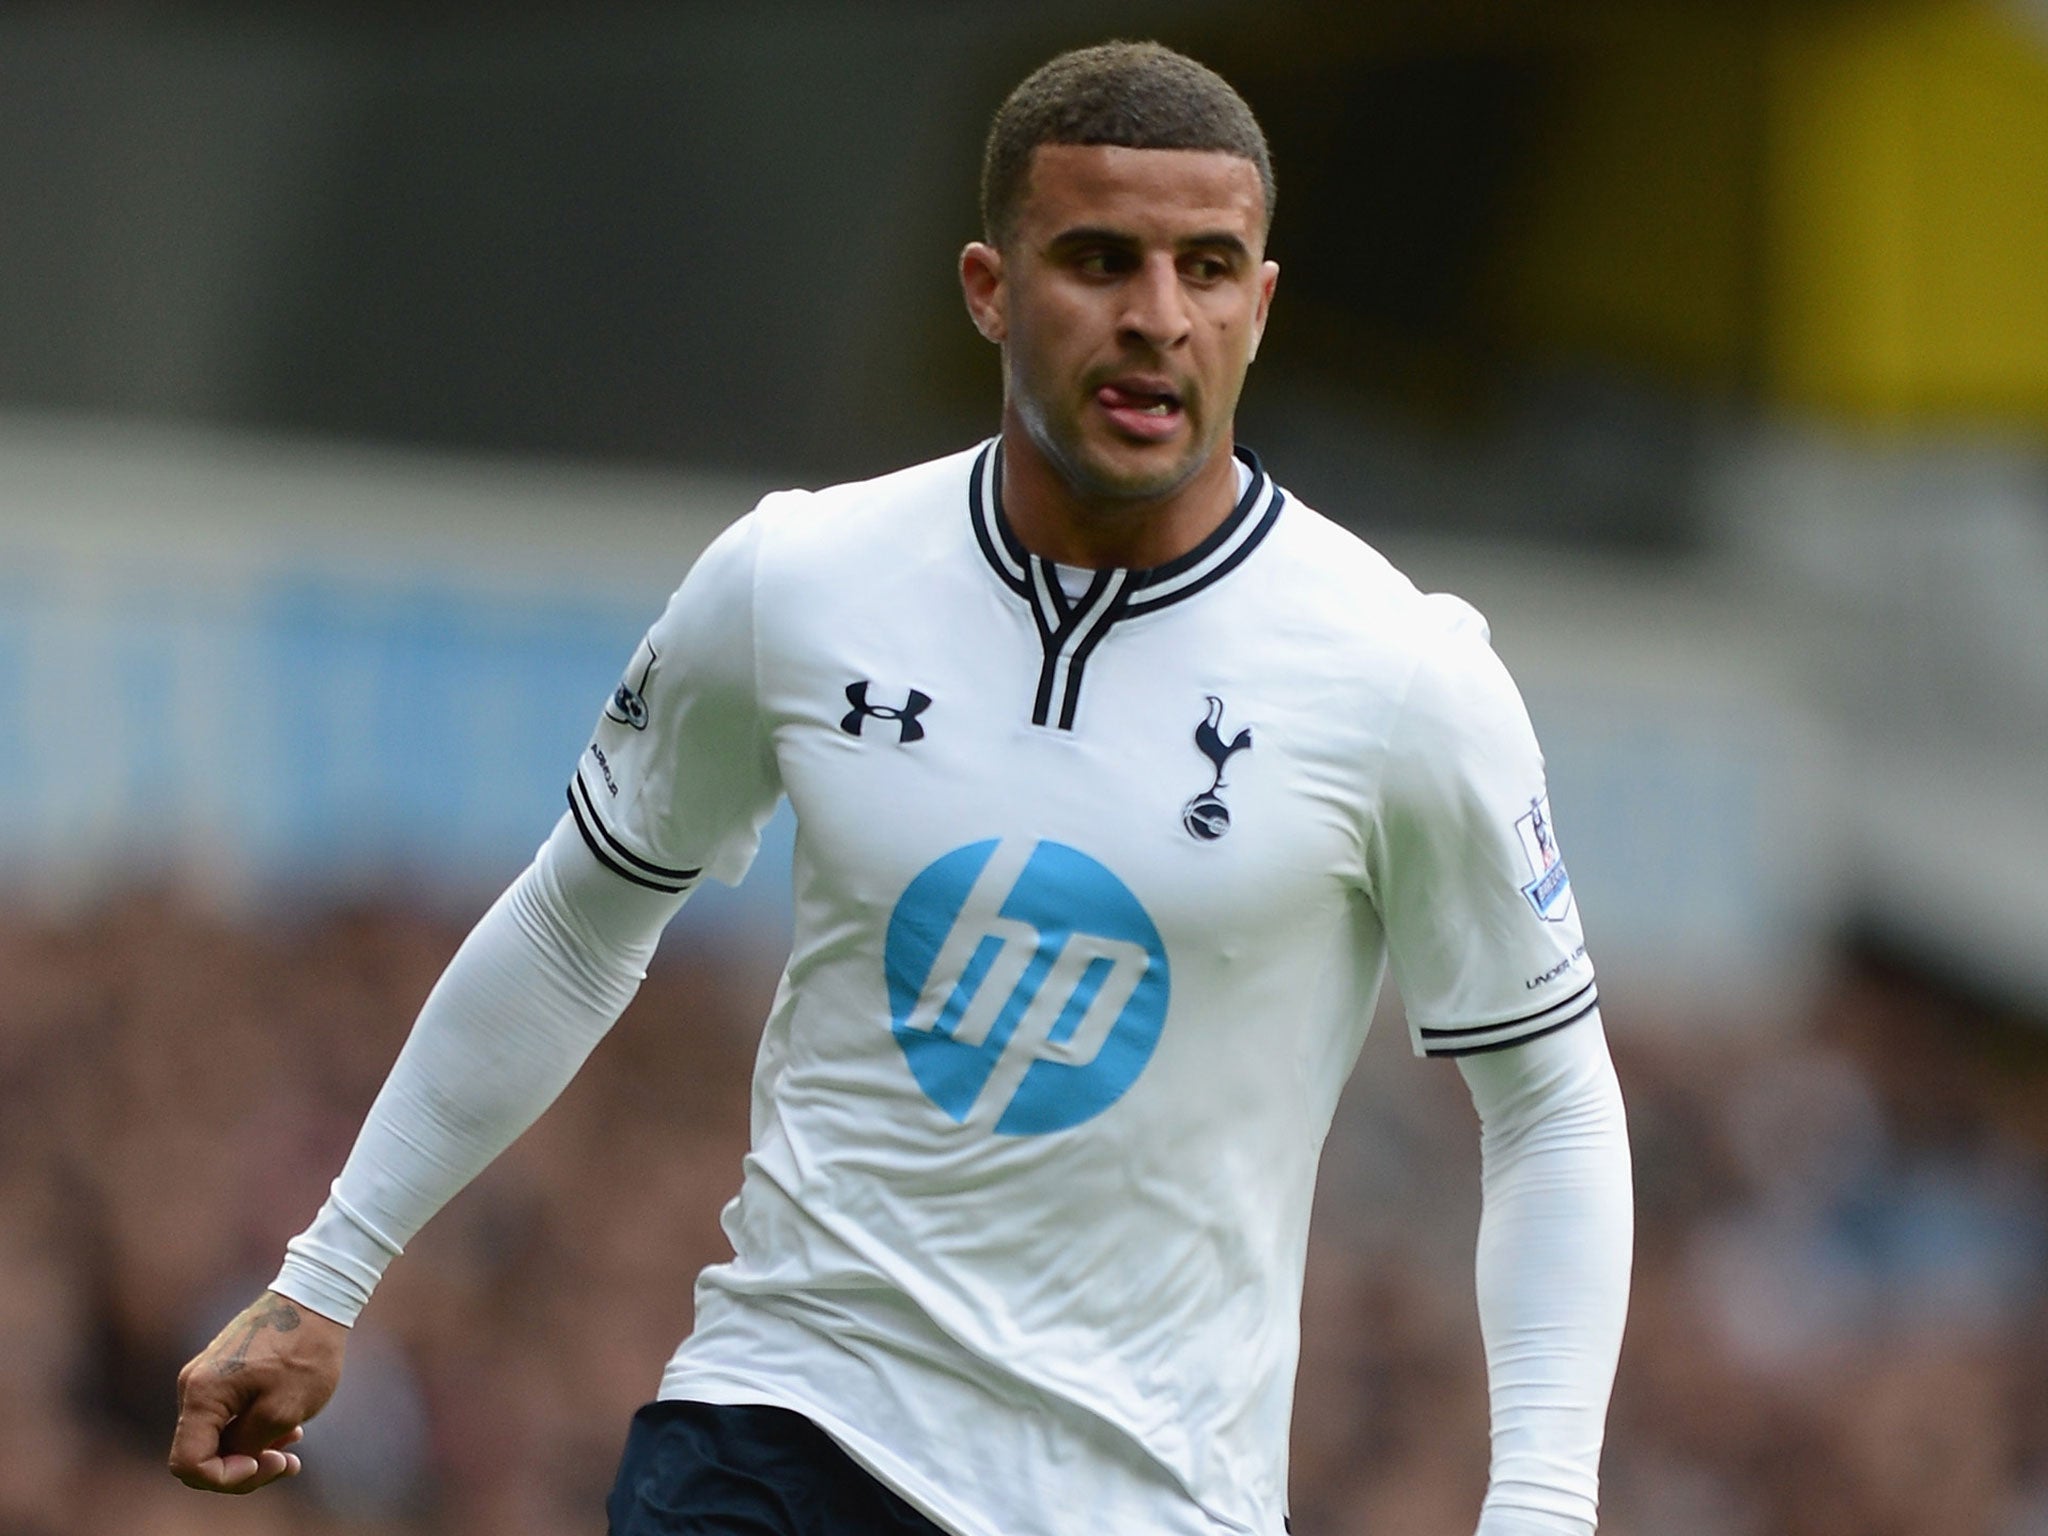 Kyle Walker has spoken of his regret at trying the legal high nitrous oxide